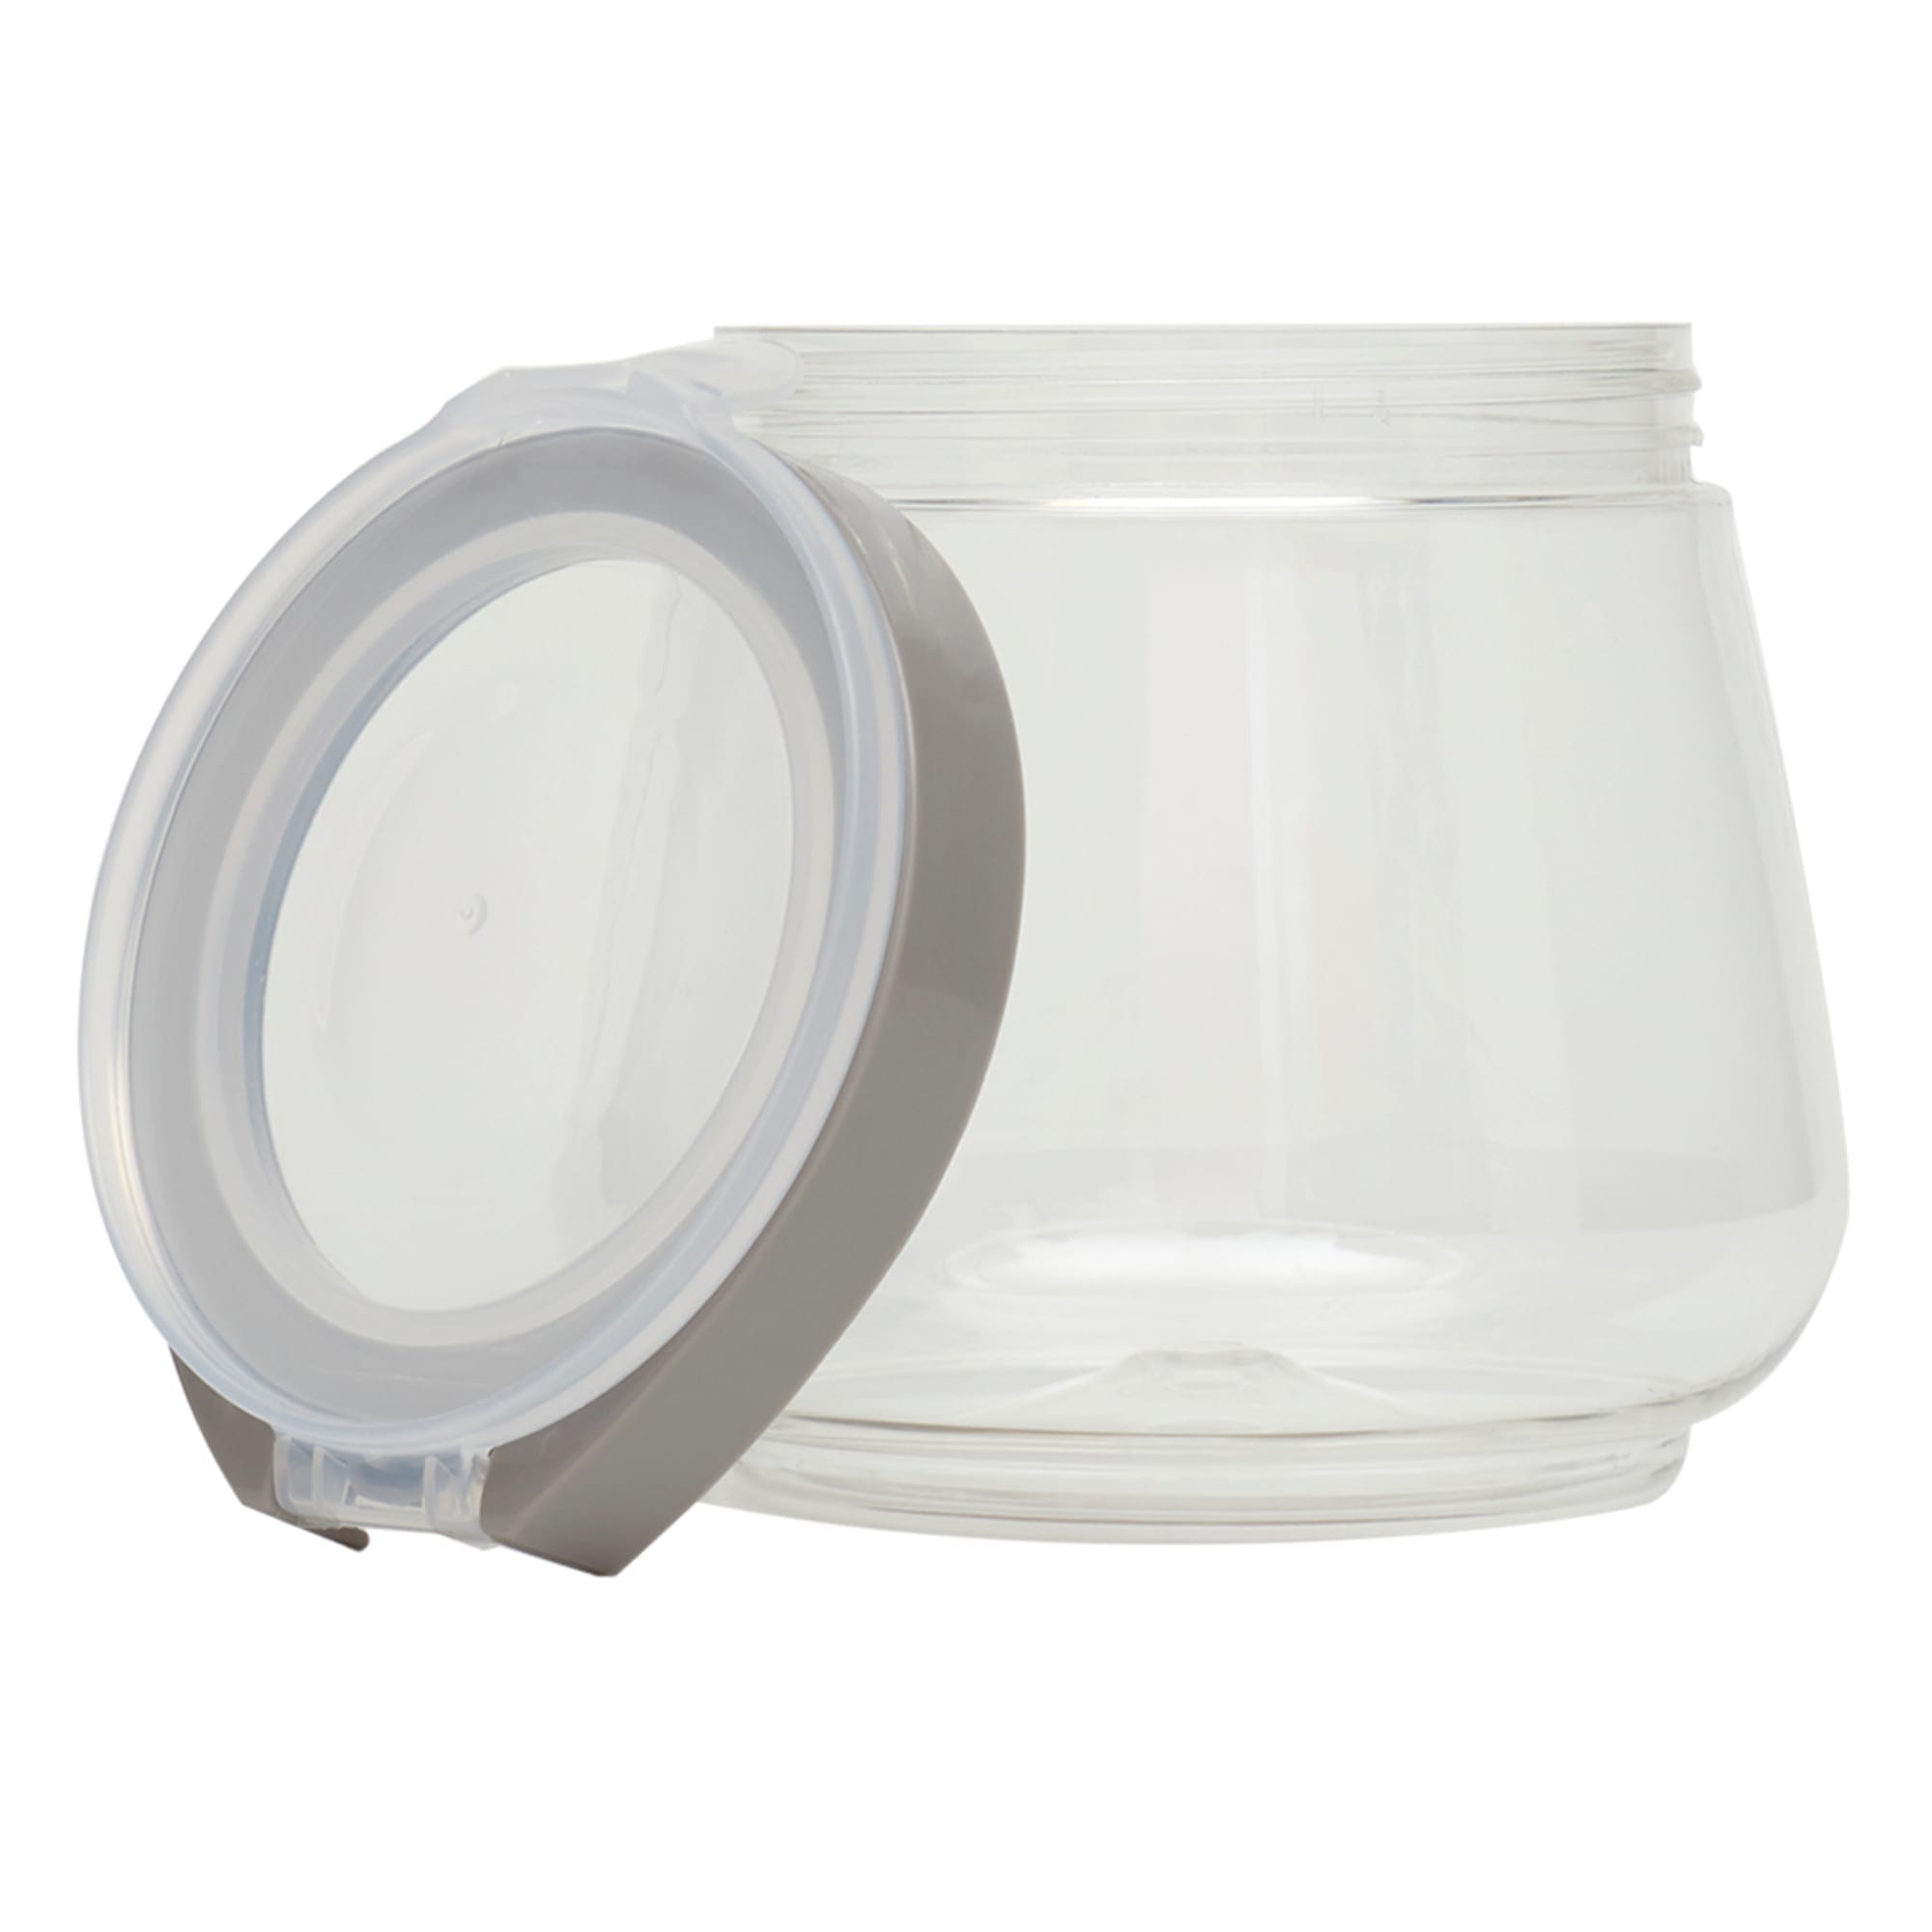 Home Basics 37 oz Plastic Flip Top Container, Clear $4.00 EACH, CASE PACK OF 6